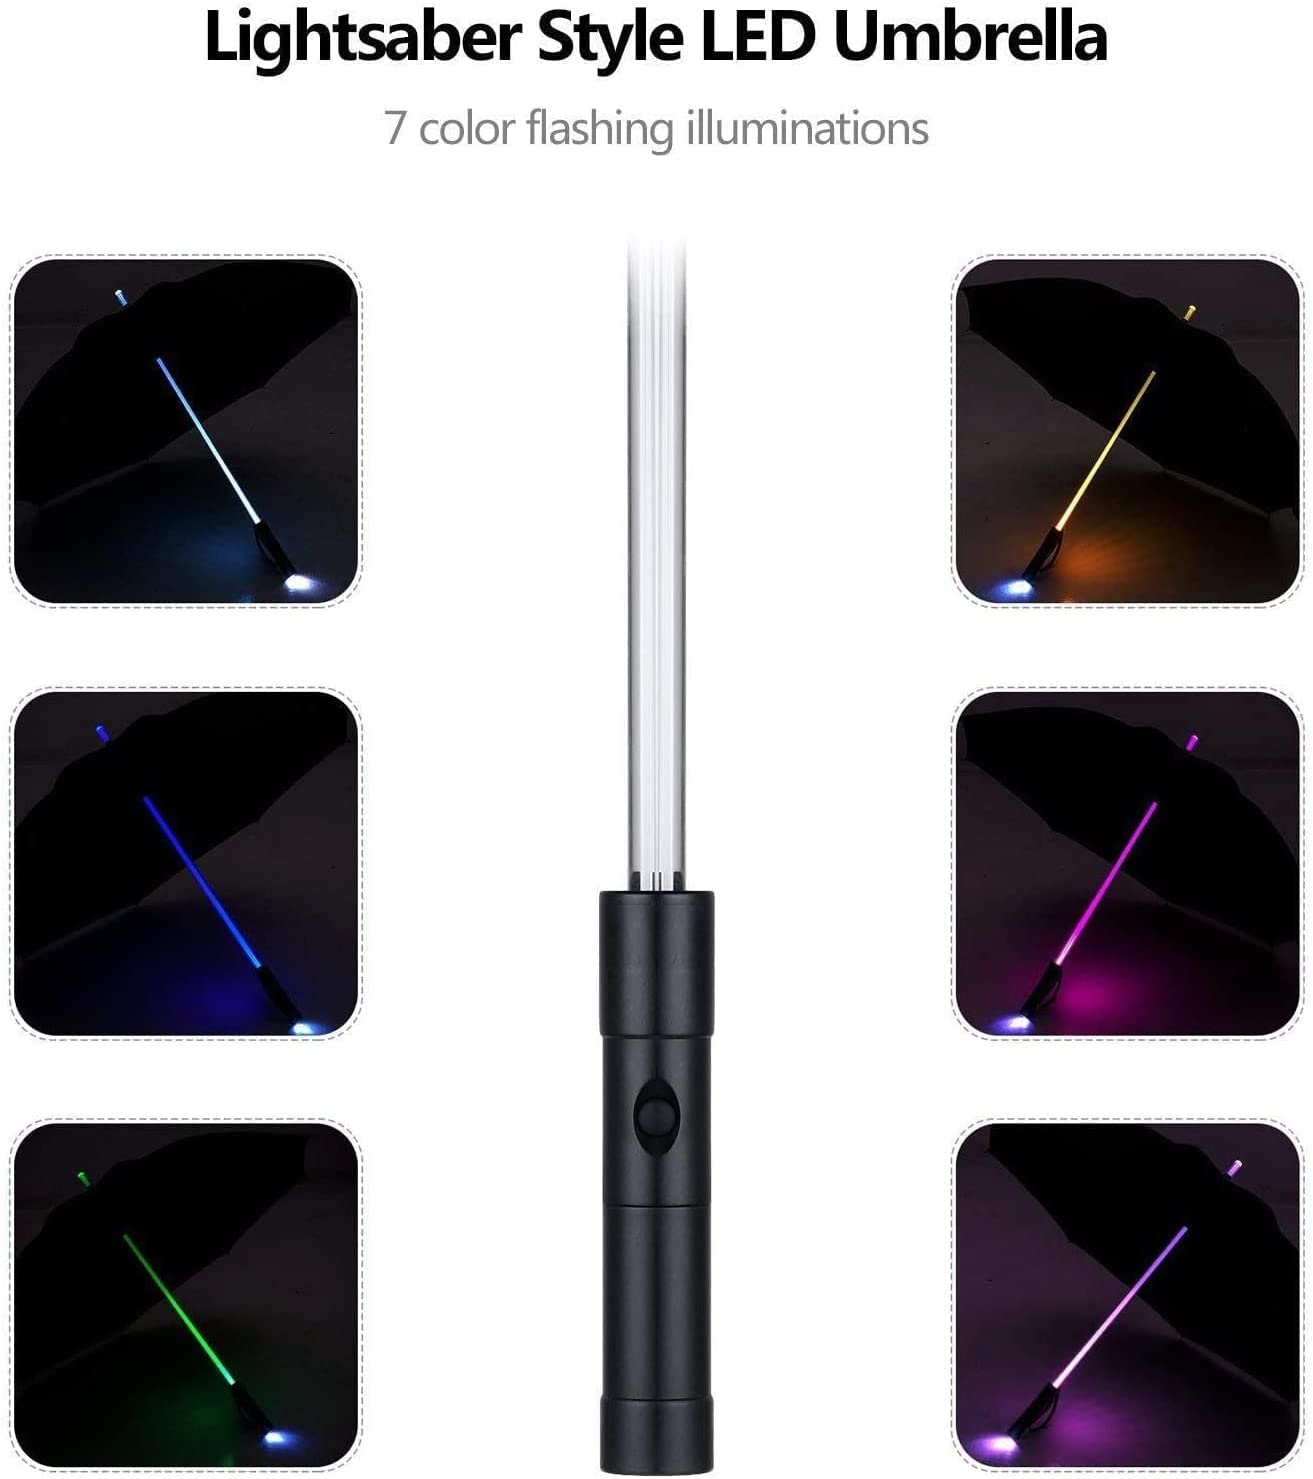 A collage of 6 images which shows the 6 colors available for the lightsaber LED umbrella.